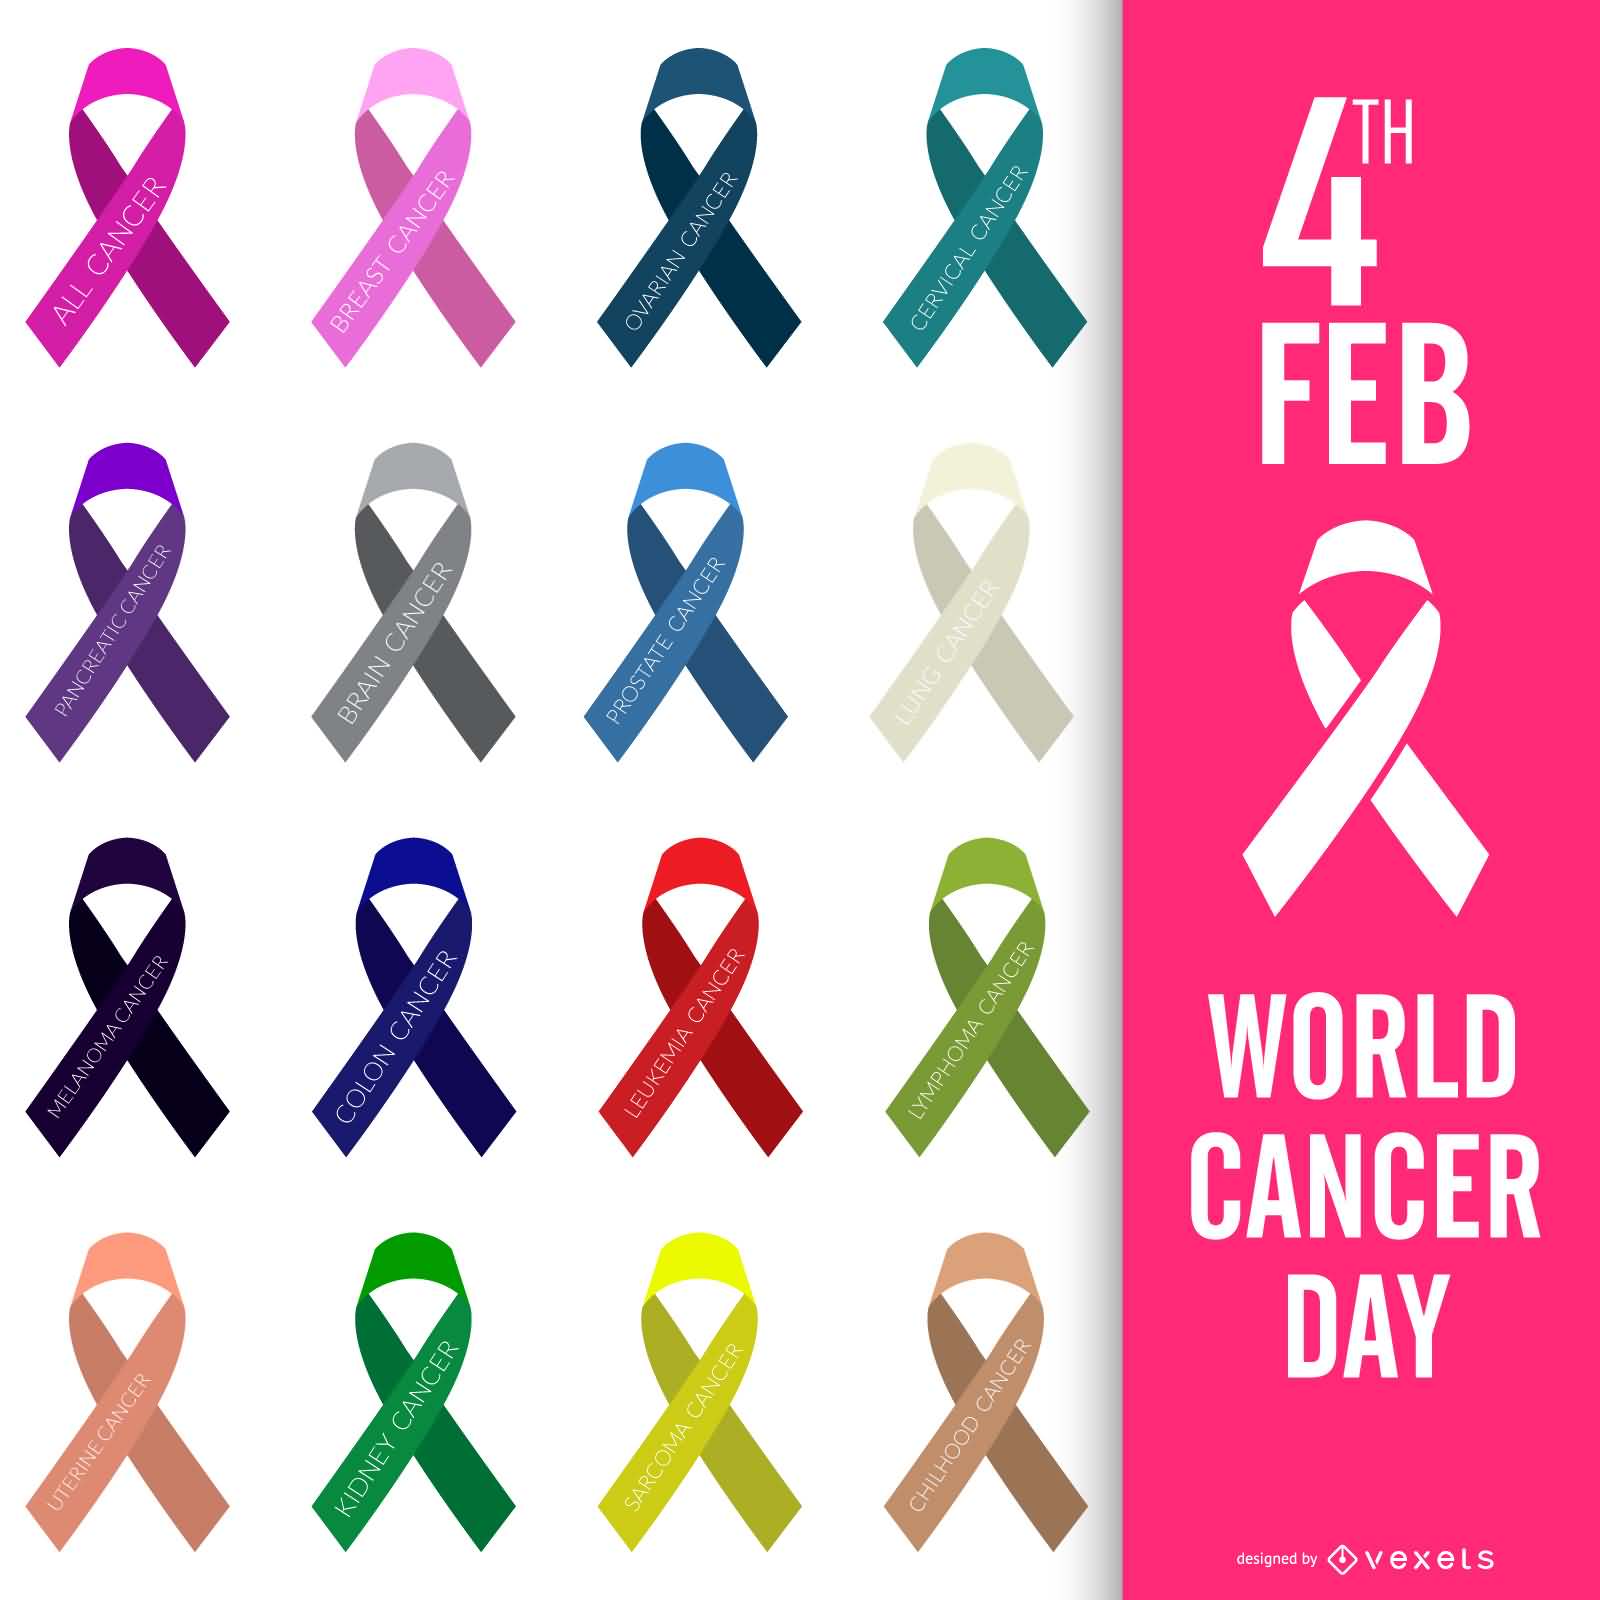 4th february World Cancer Day ribbons picture